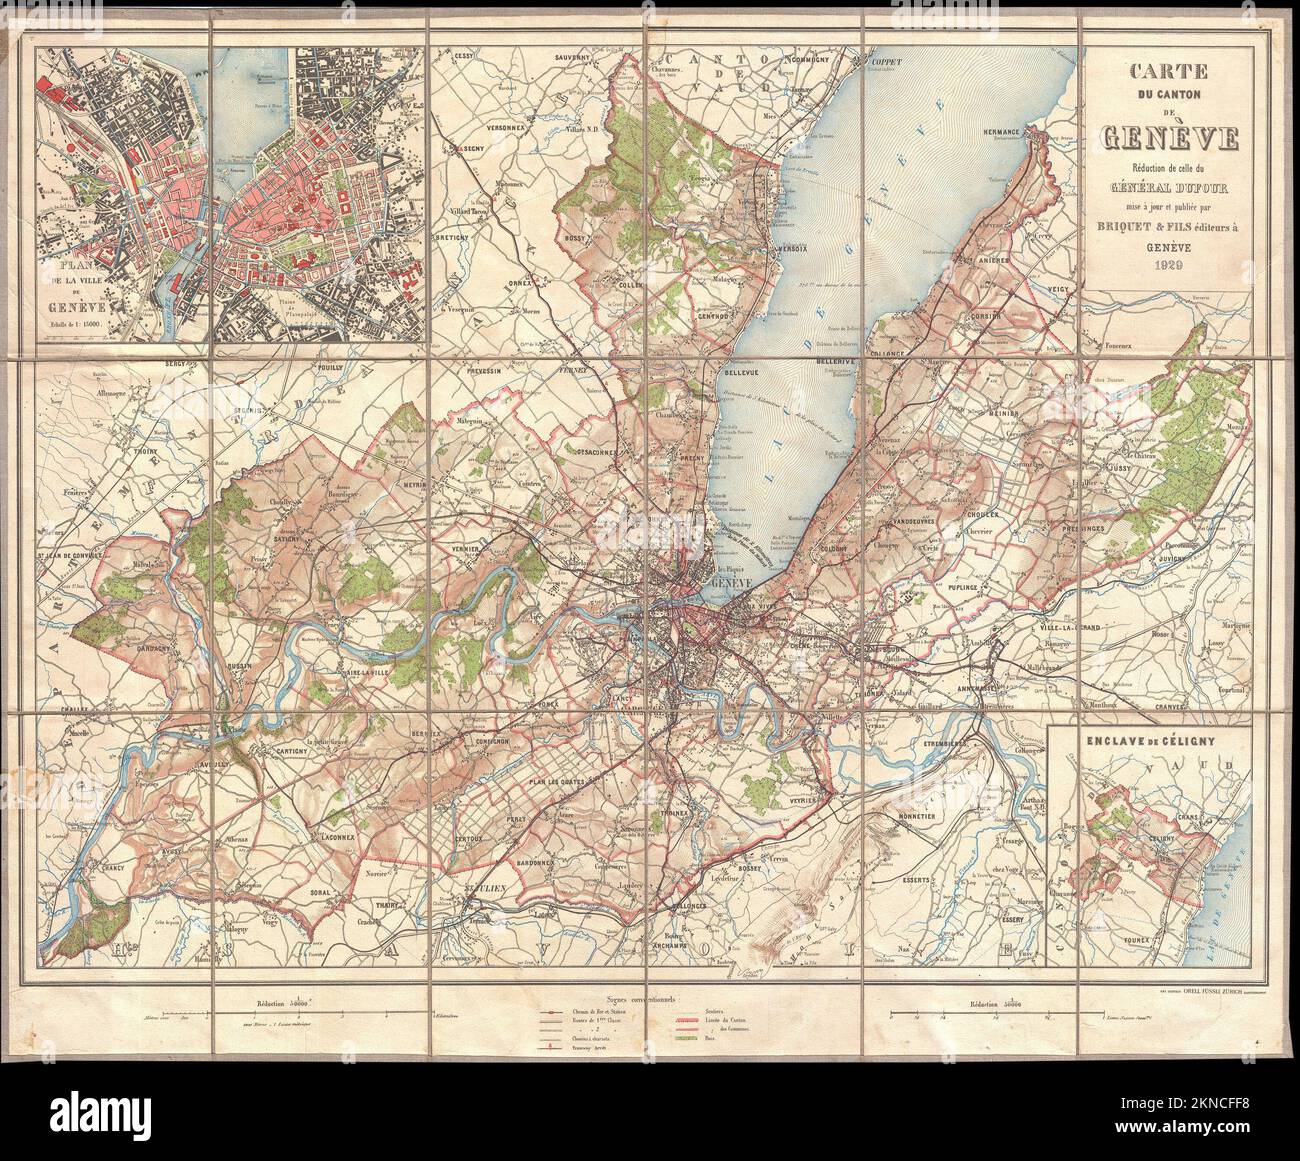 Vintage city plan of Geneva and area around it from 20th century. Maps are beautifully hand illustrated and engraved showing it at the time. Stock Photo